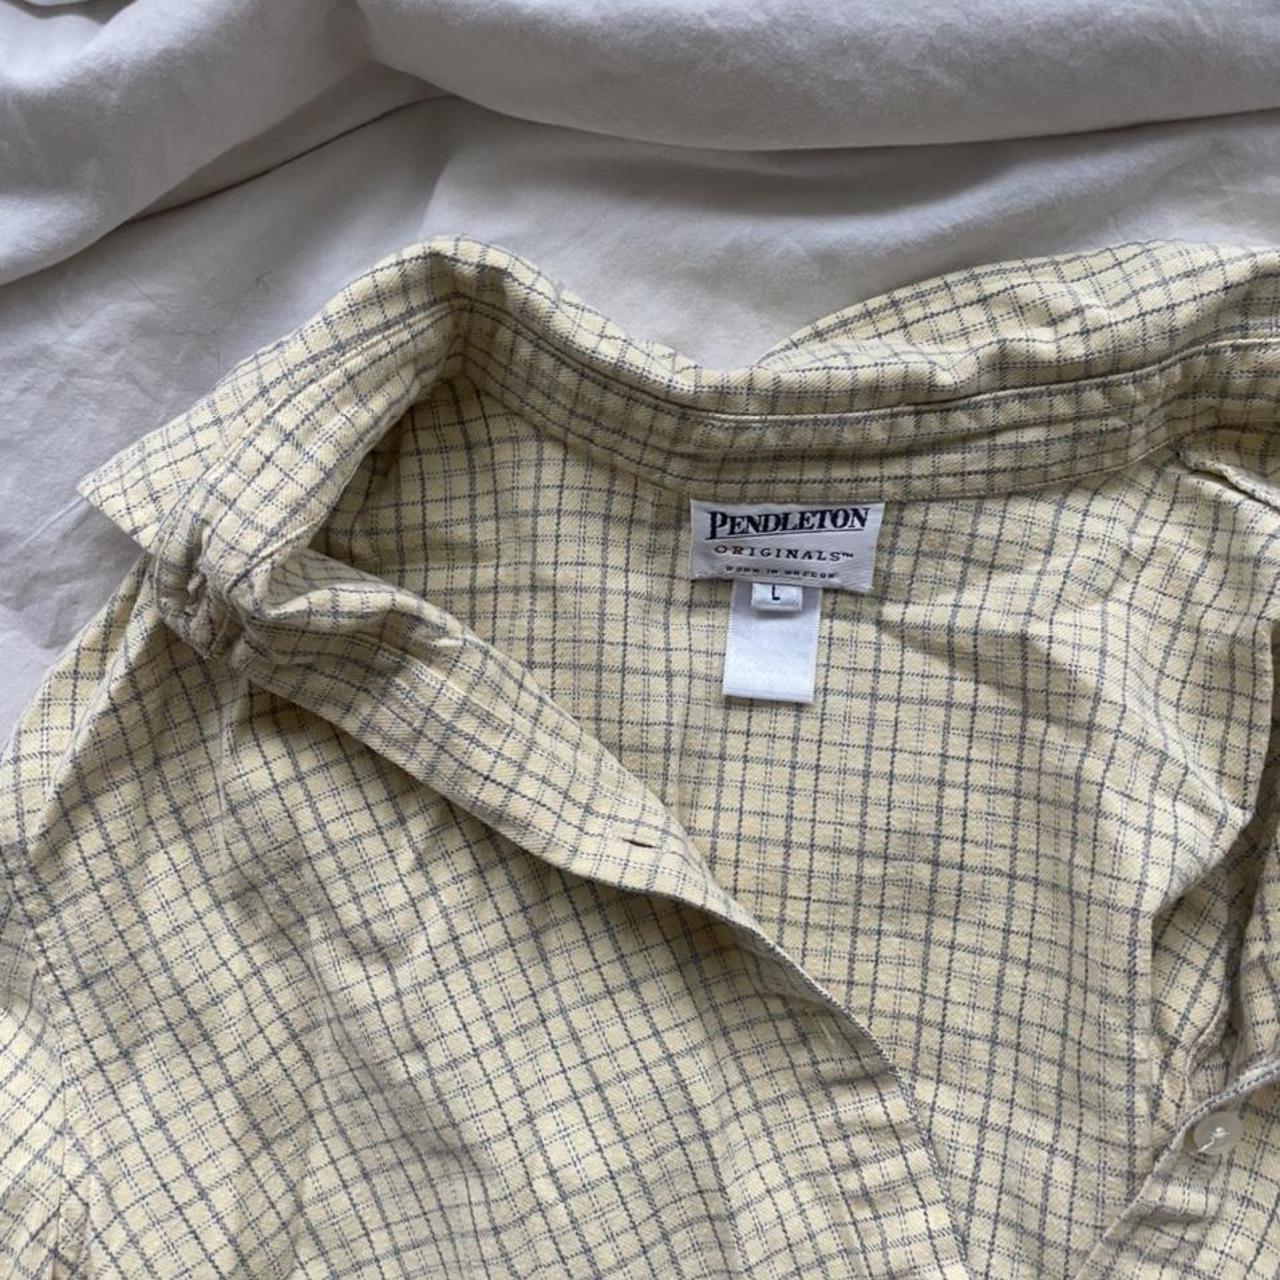 Soft yellow Pendleton flannel shirt with blue and... - Depop